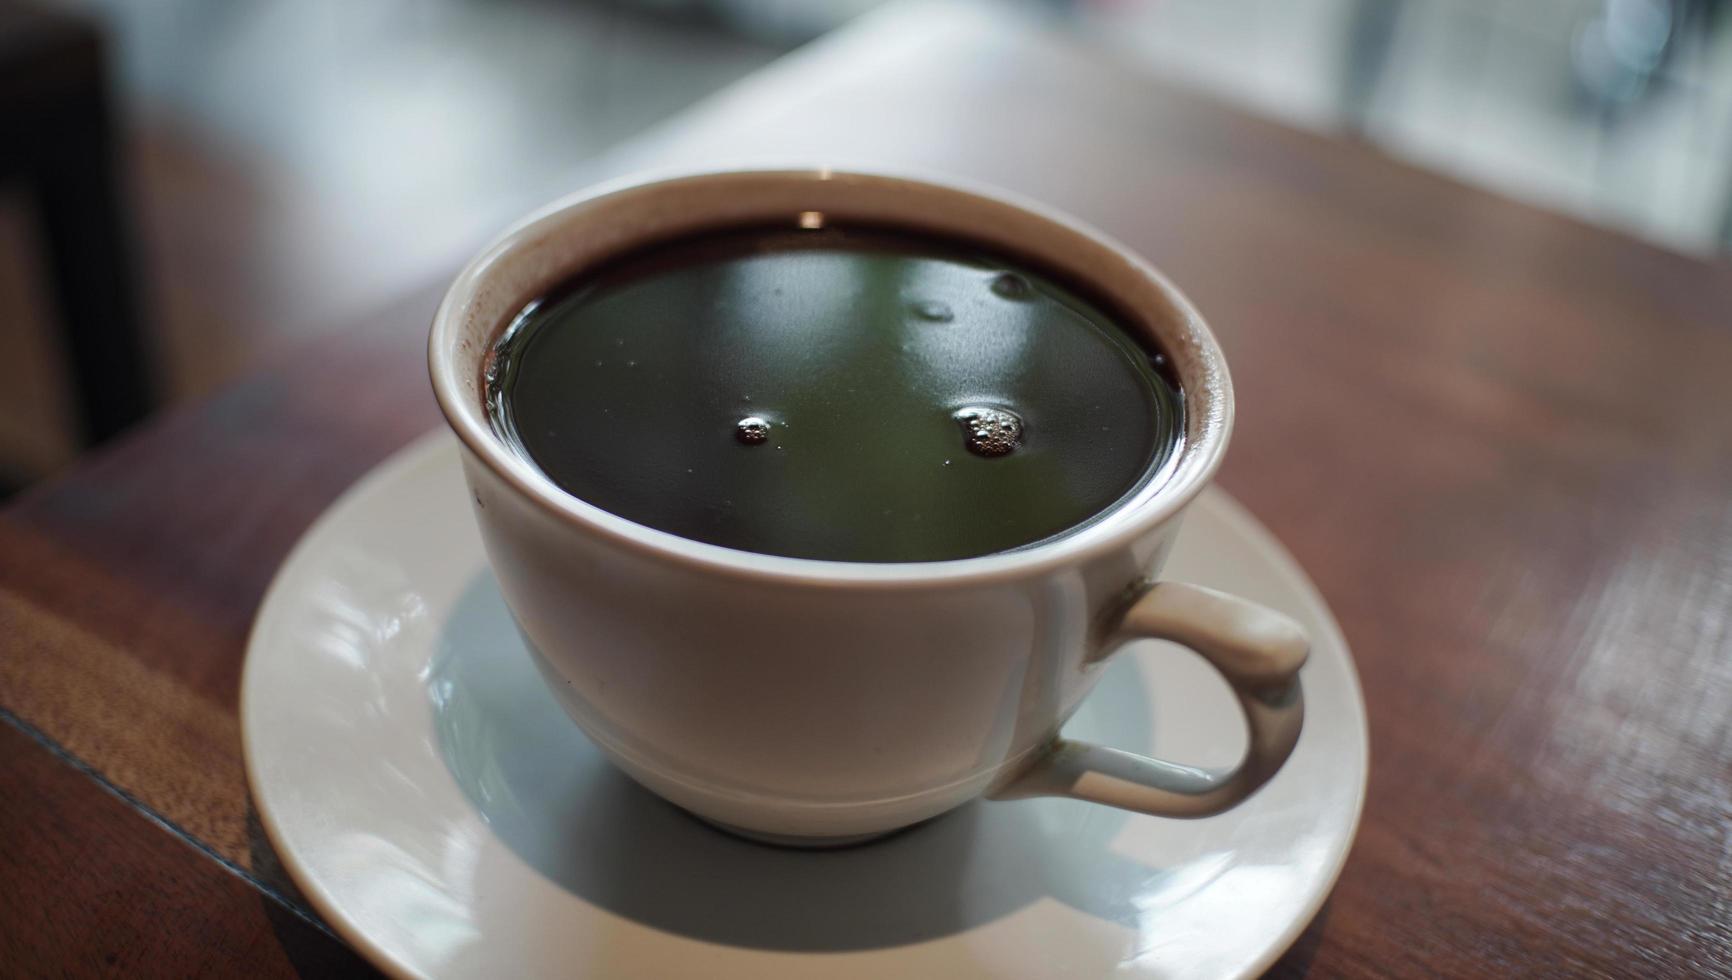 A close up view of a cup of black coffee photo